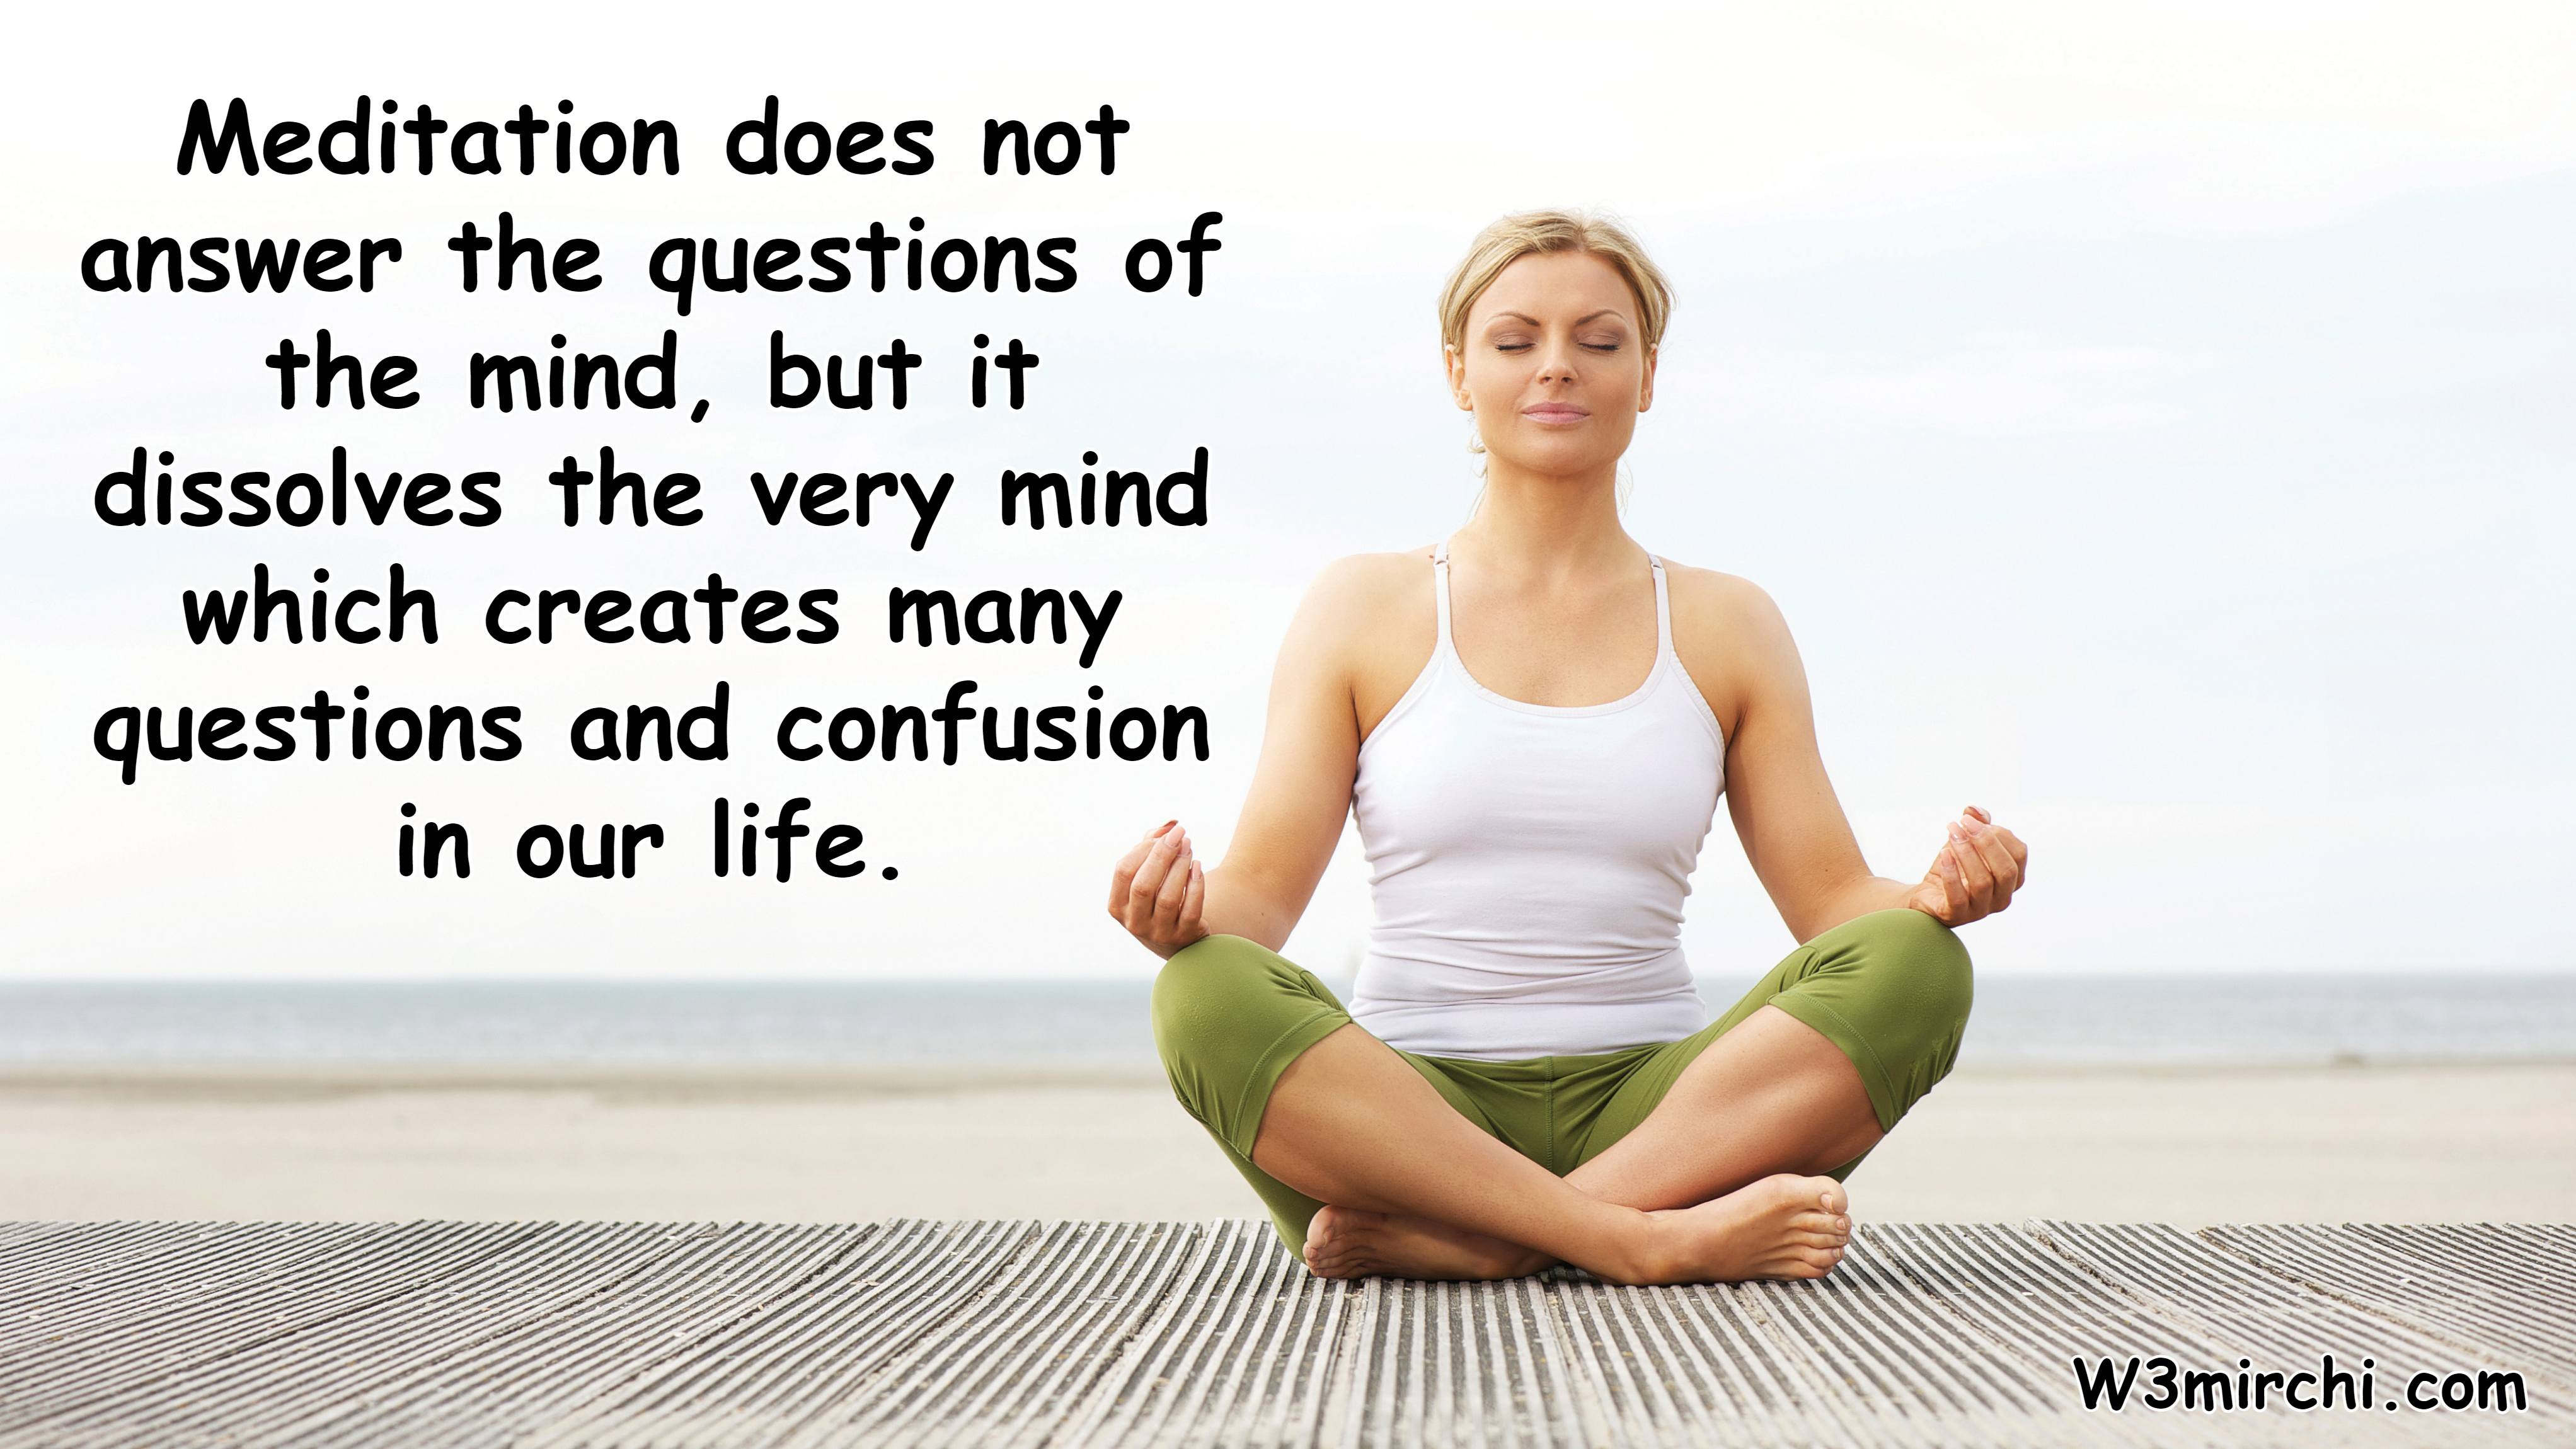 Meditation does not answer the questions